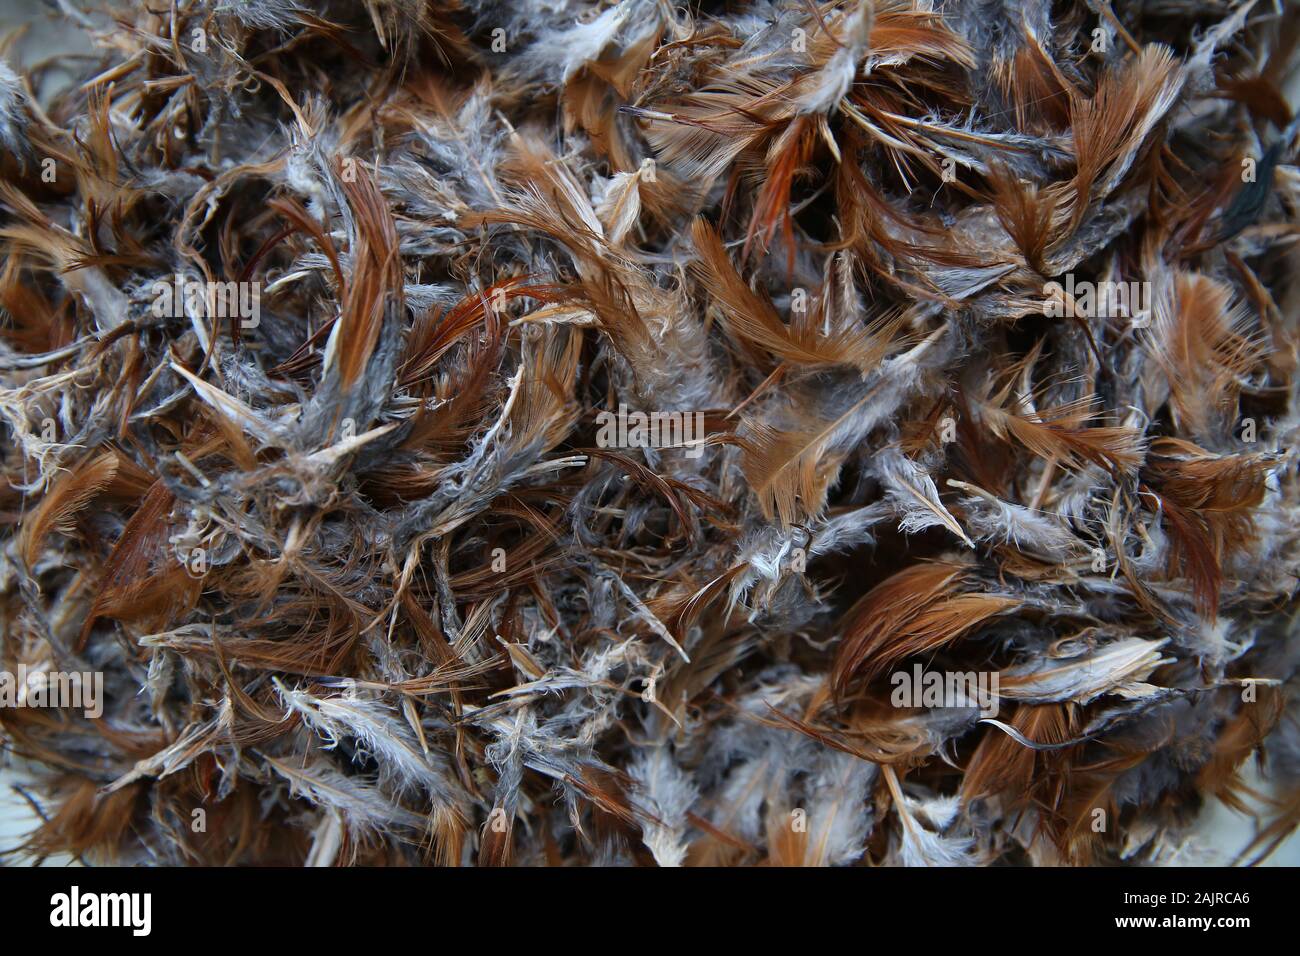 Huge collection of brown chicken feathers. Plumage carpet